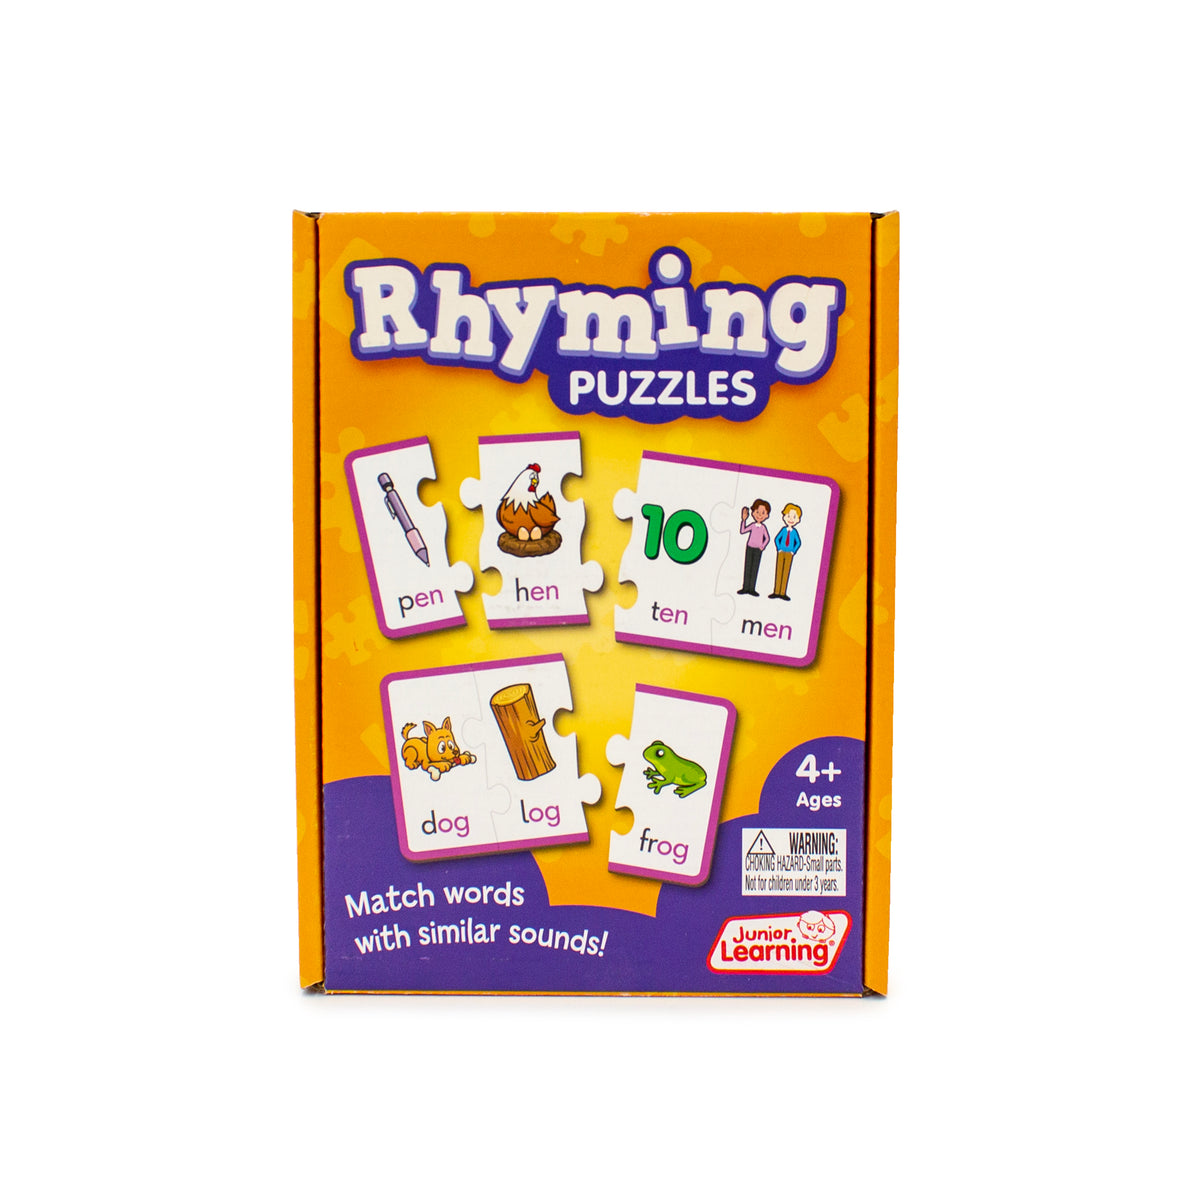 Junior Learning JL656 Rhyming Puzzles box faced front